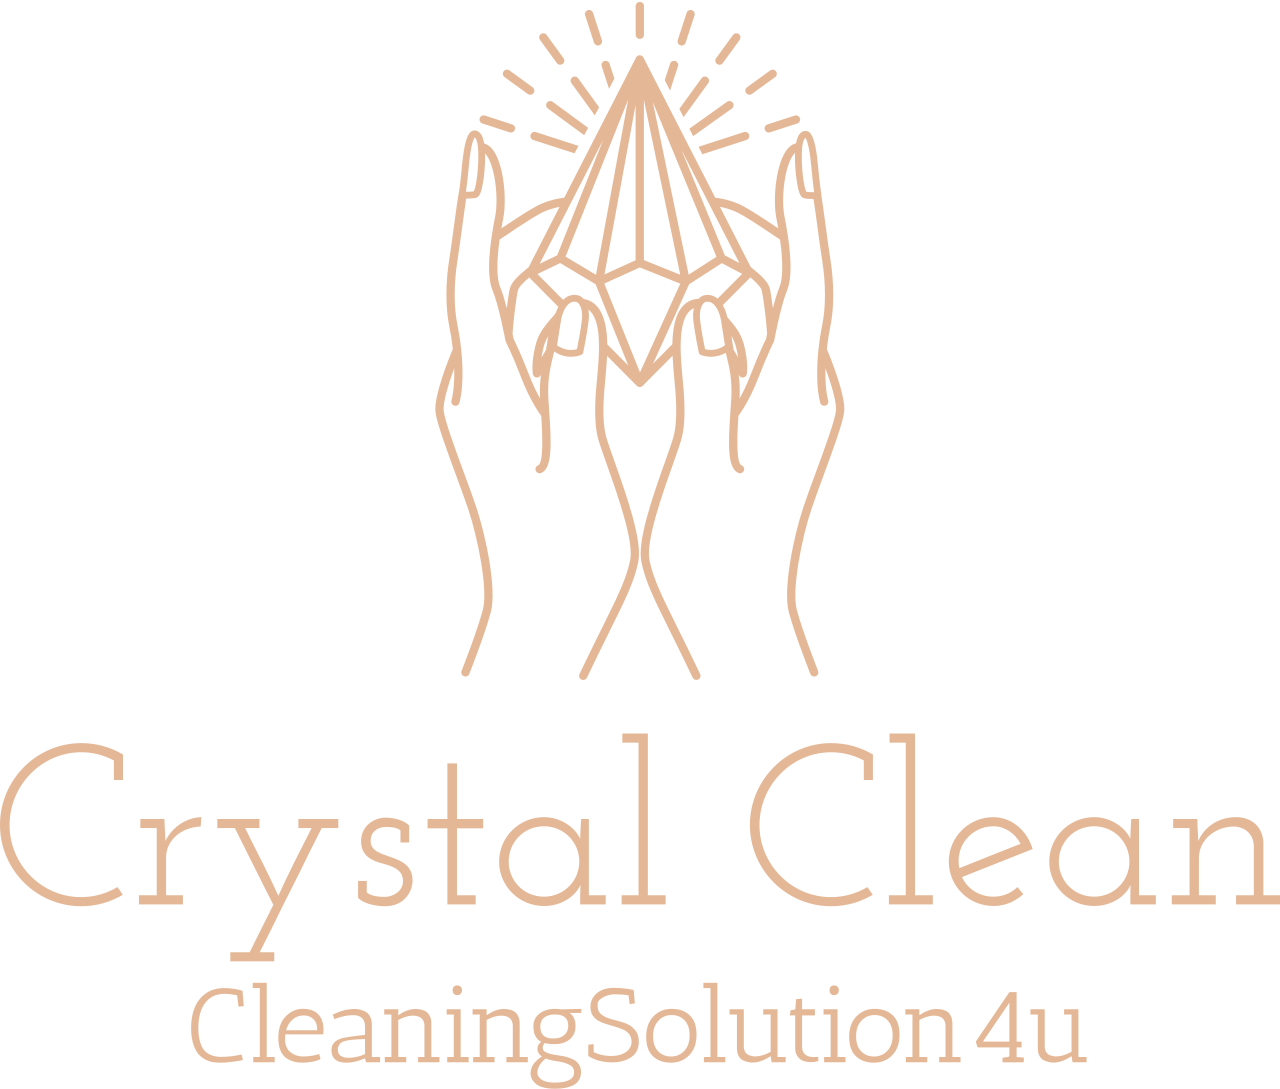 Crystal Clean's web page